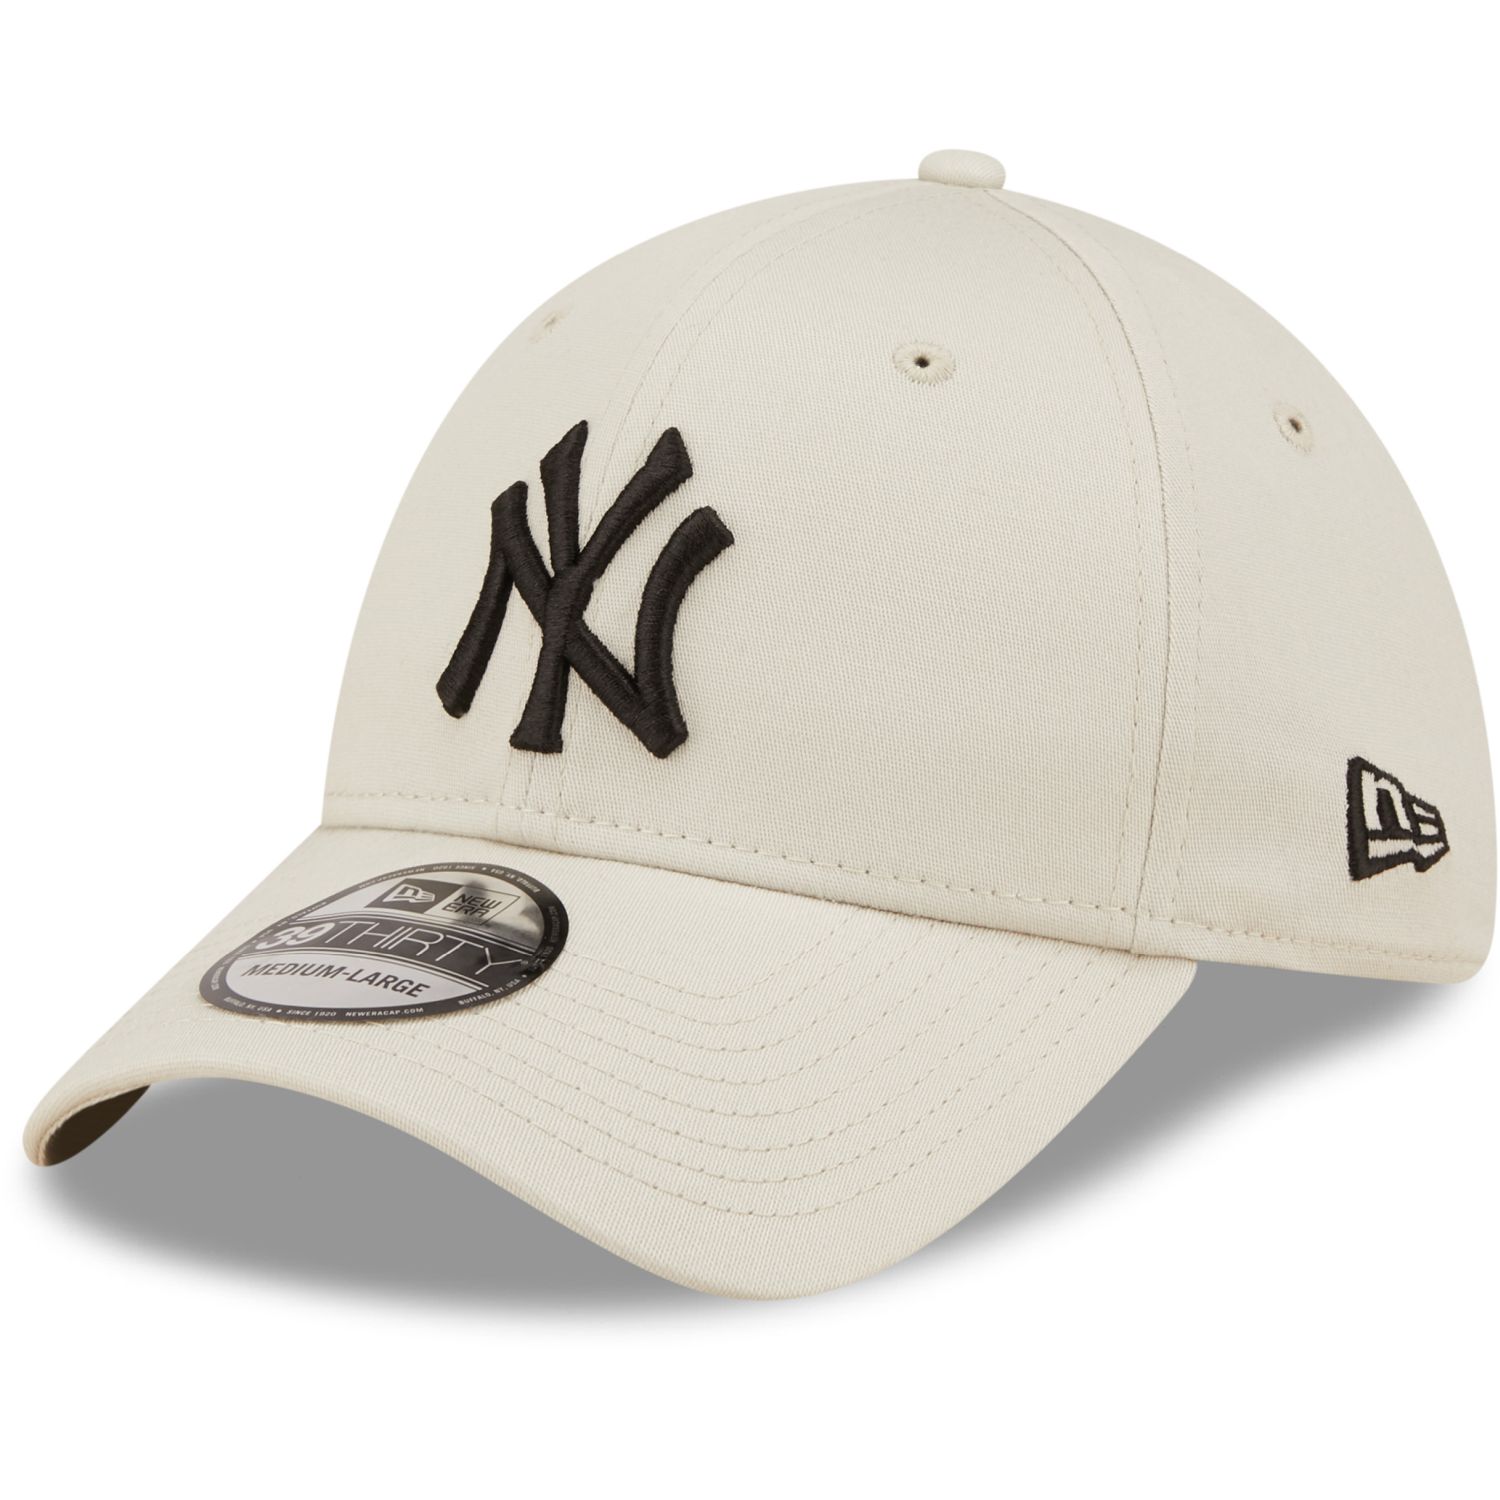 NEW ERA 39THIRTY MLB NEW YORK YANKEES OLIVE STRETCH FITTED CAP